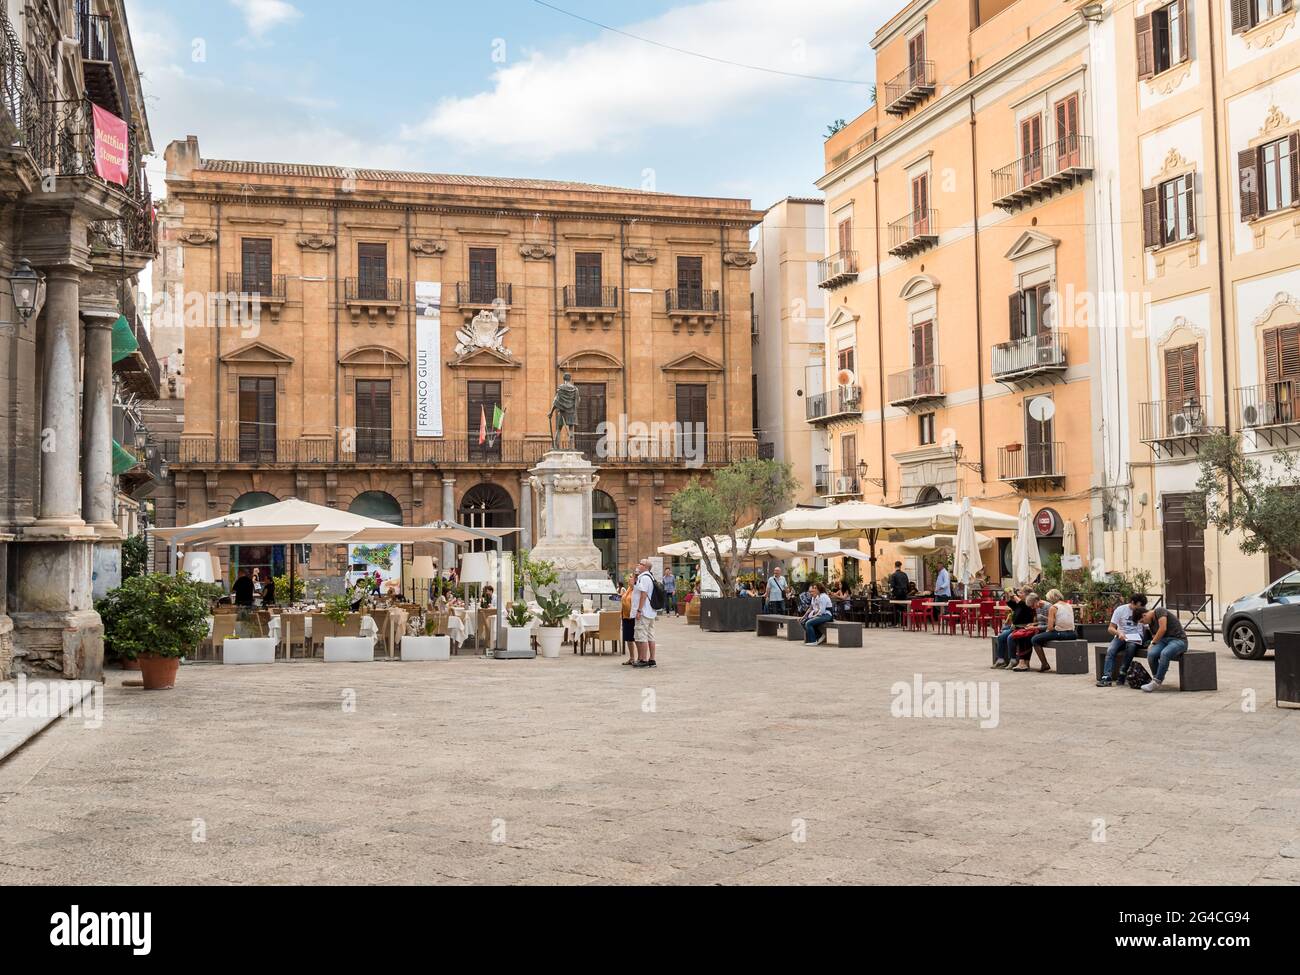 Palermo, Sicily, Italy - October 6, 2017: Bologni square with outdoor bar in the historic center of Palermo, Sicily, Italy Stock Photo